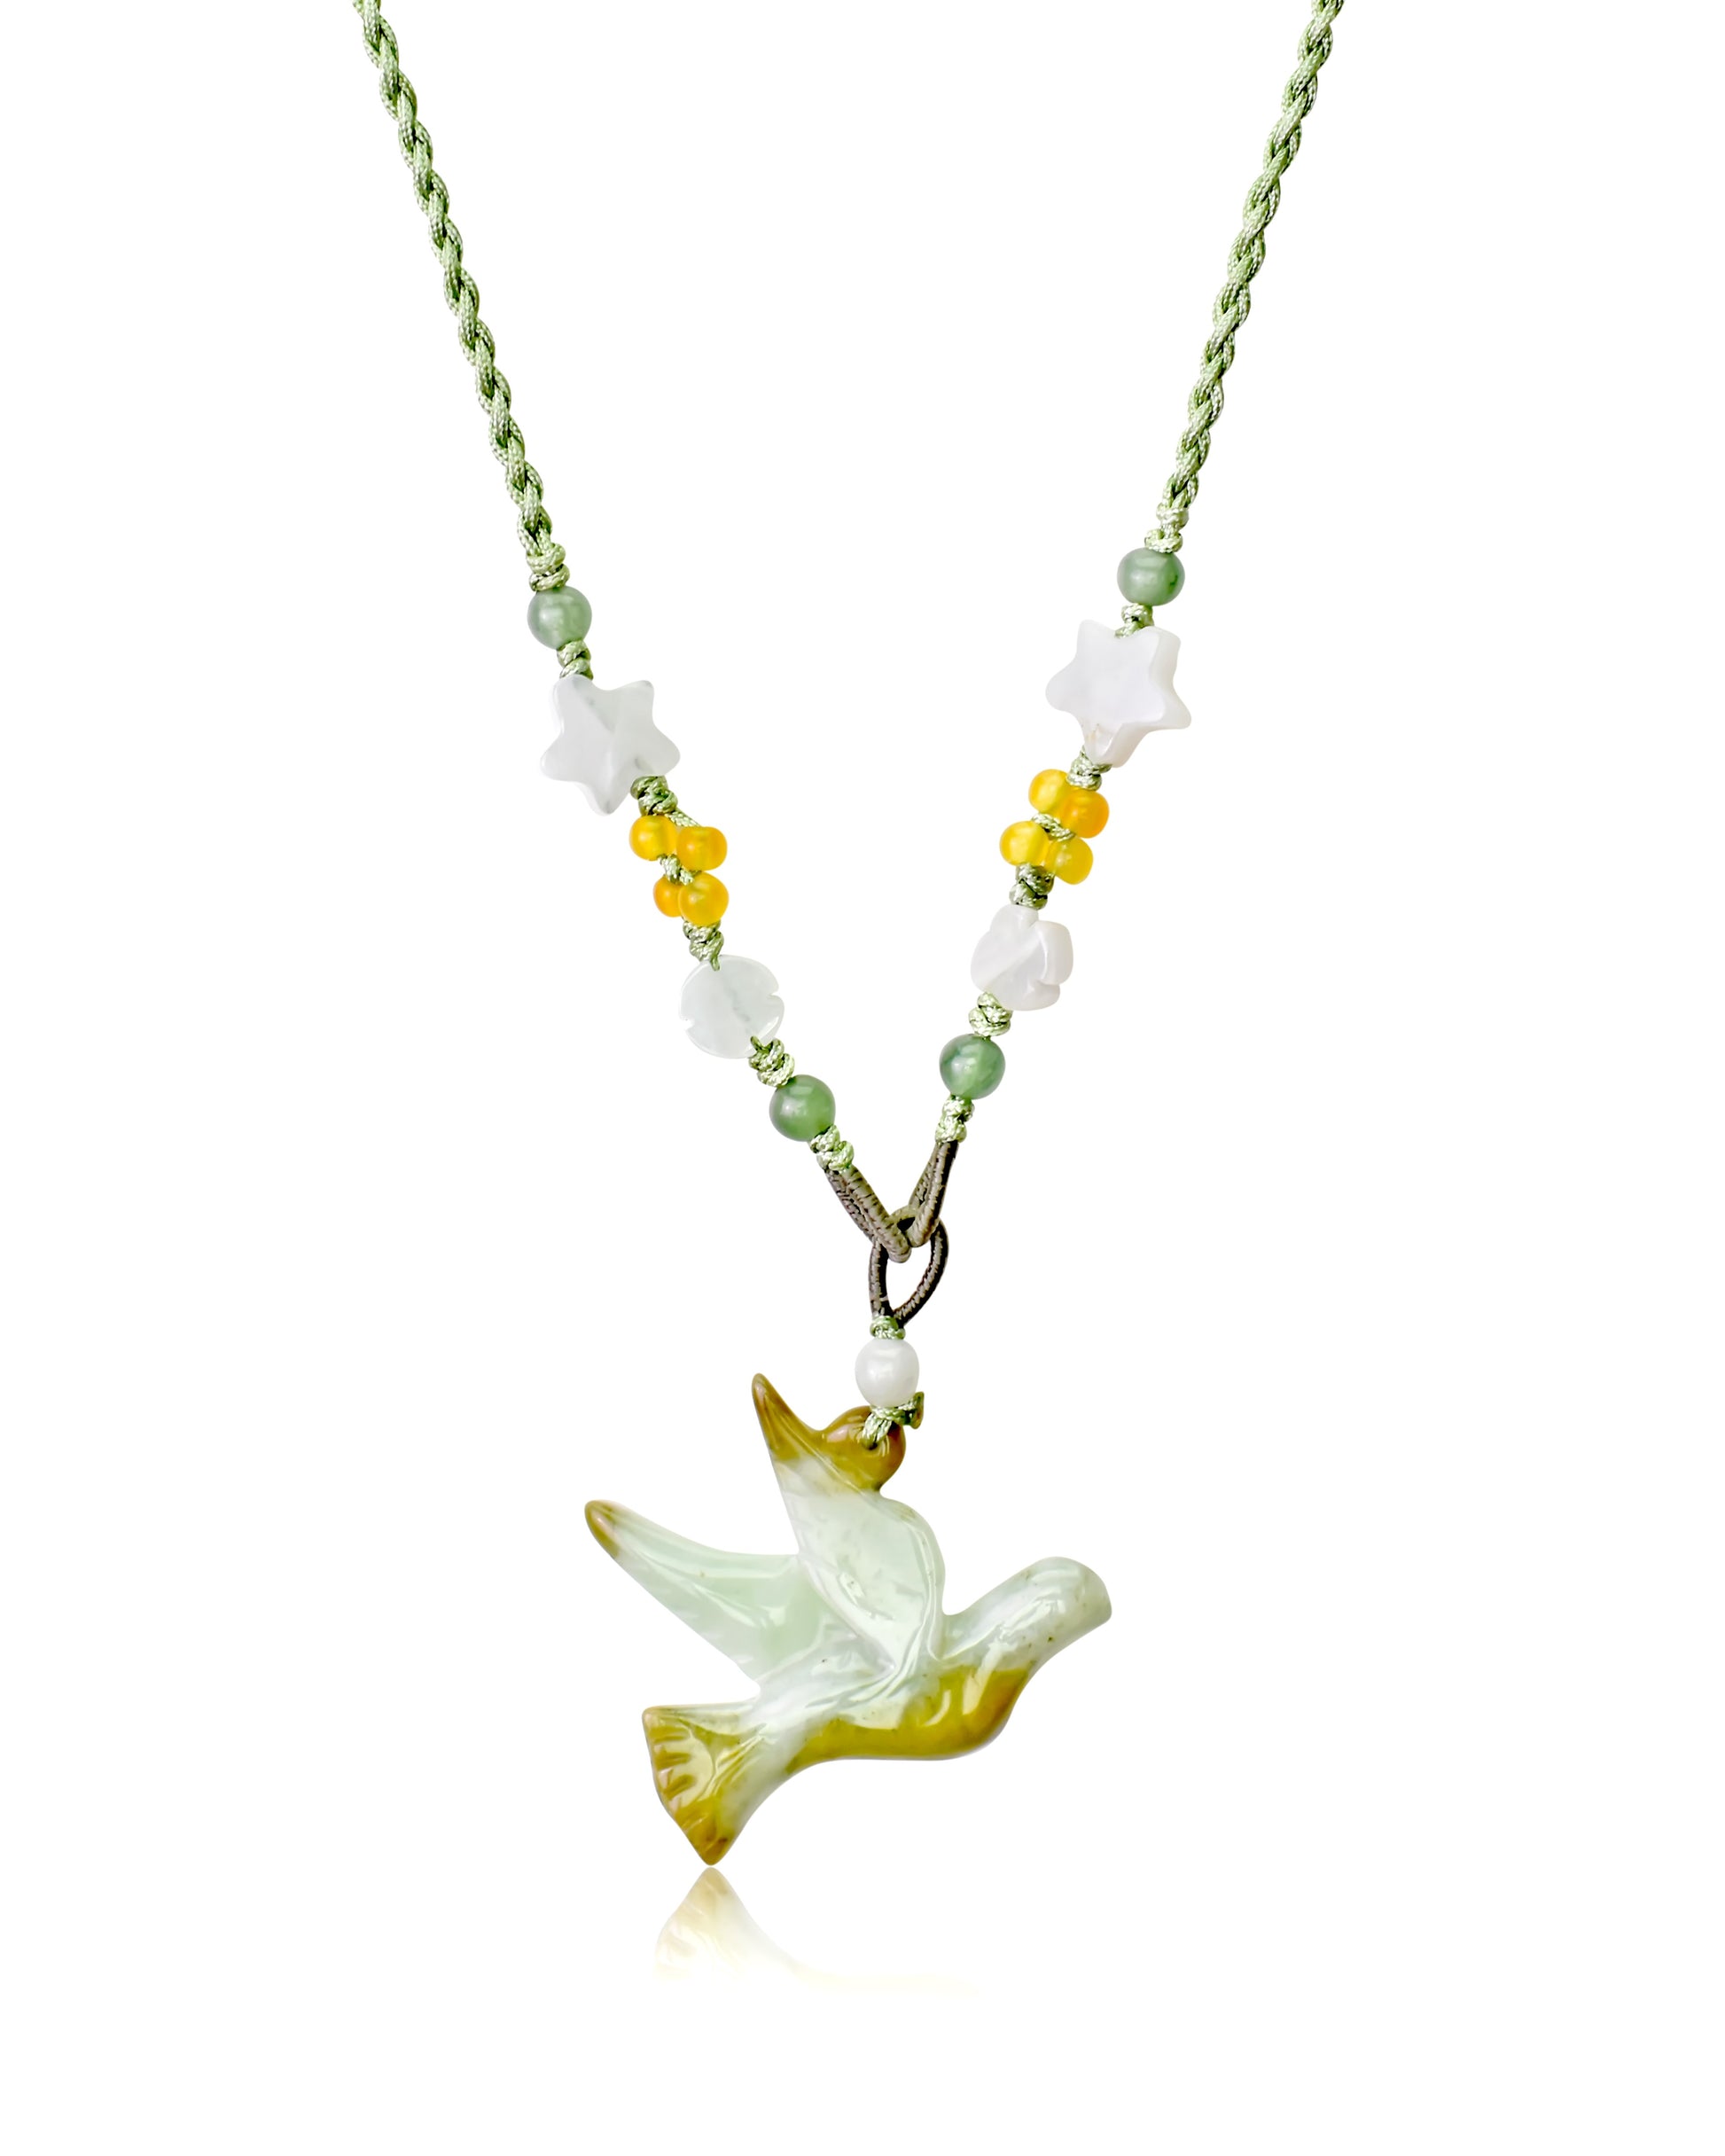 Feel the Power of a New Beginning with Elegant Bird Jade Necklace